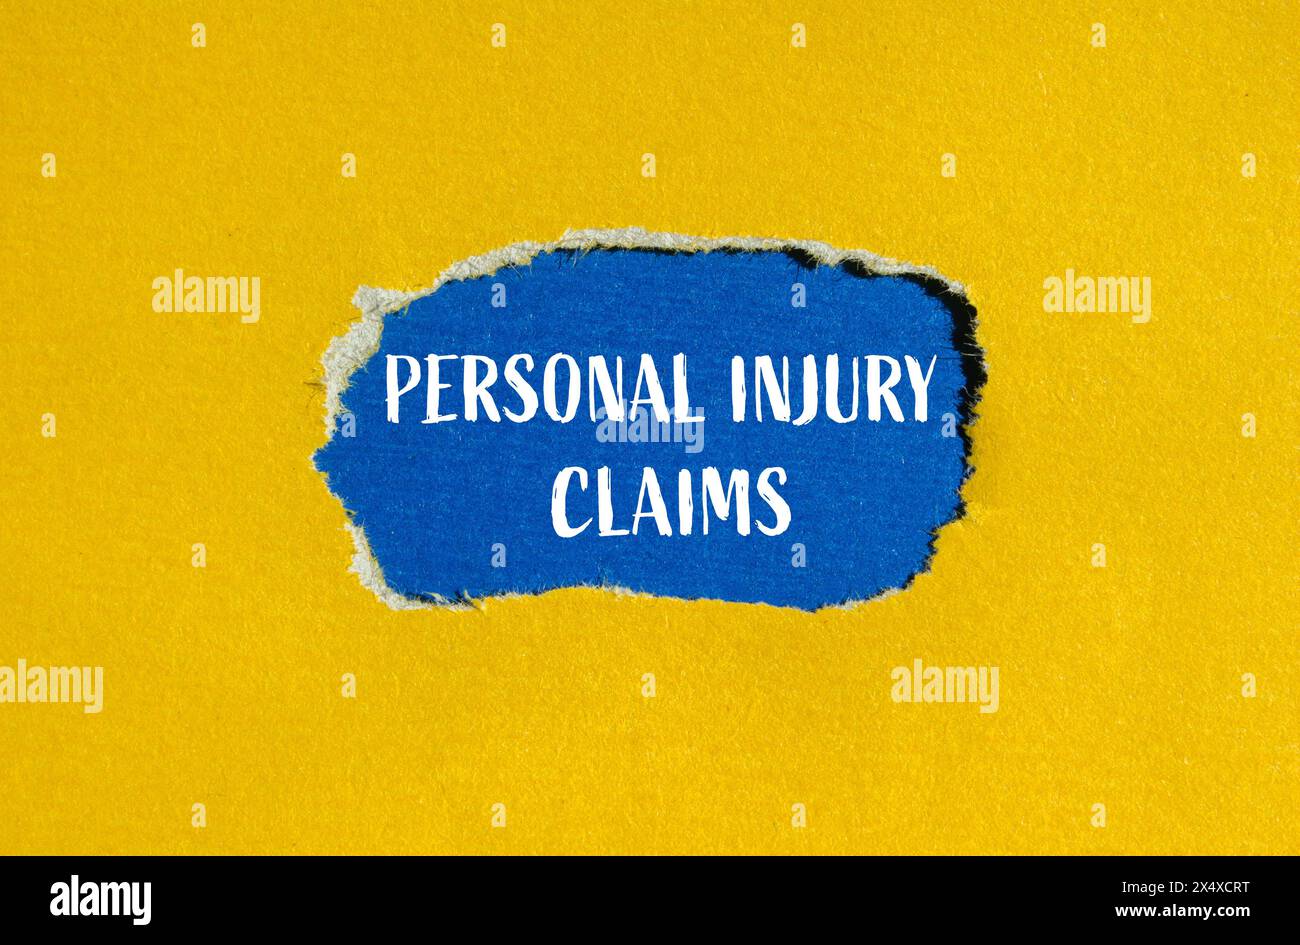 Personal injury claims written on ripped yellow paper with blue background. Conceptual personal injury claims symbol. Copy space. Stock Photo